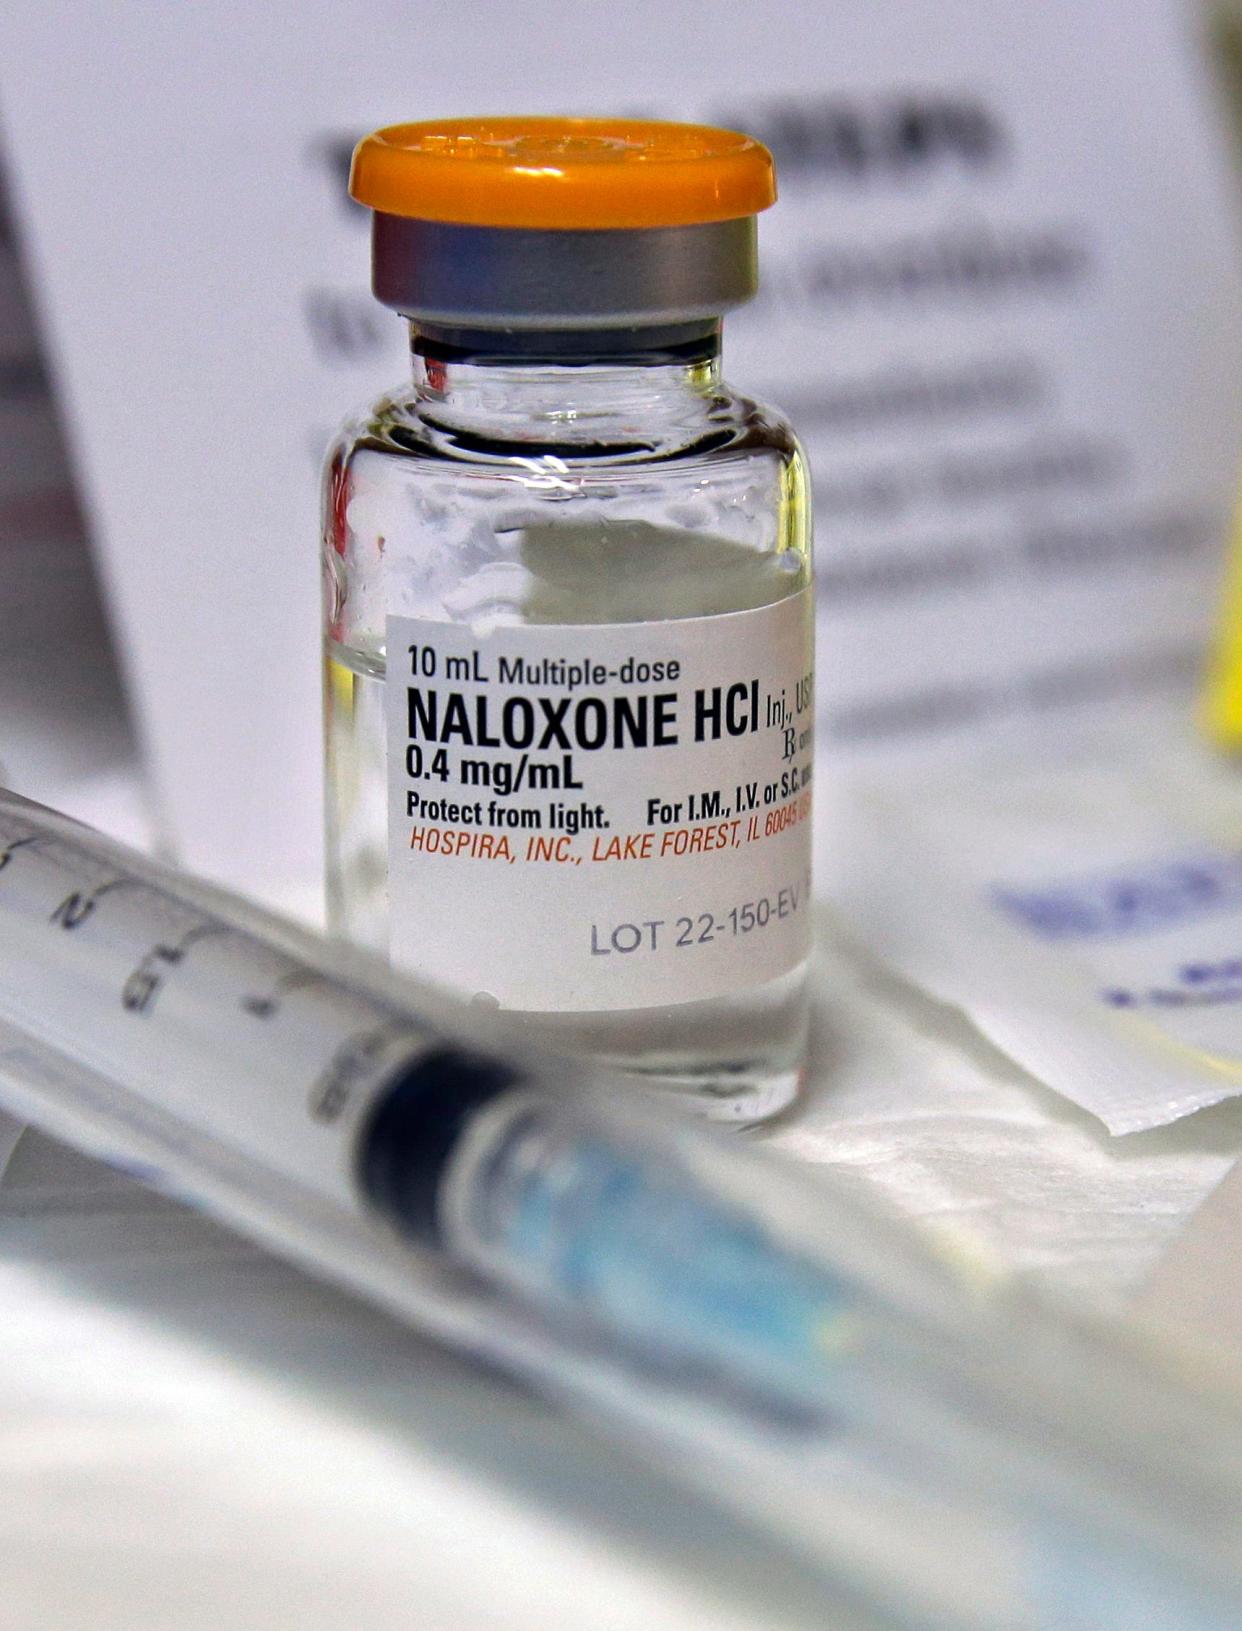 Naloxone, also known by its brand name Narcan, is used more and more by police and medical personnel to treat heroin and opioid overdoses.